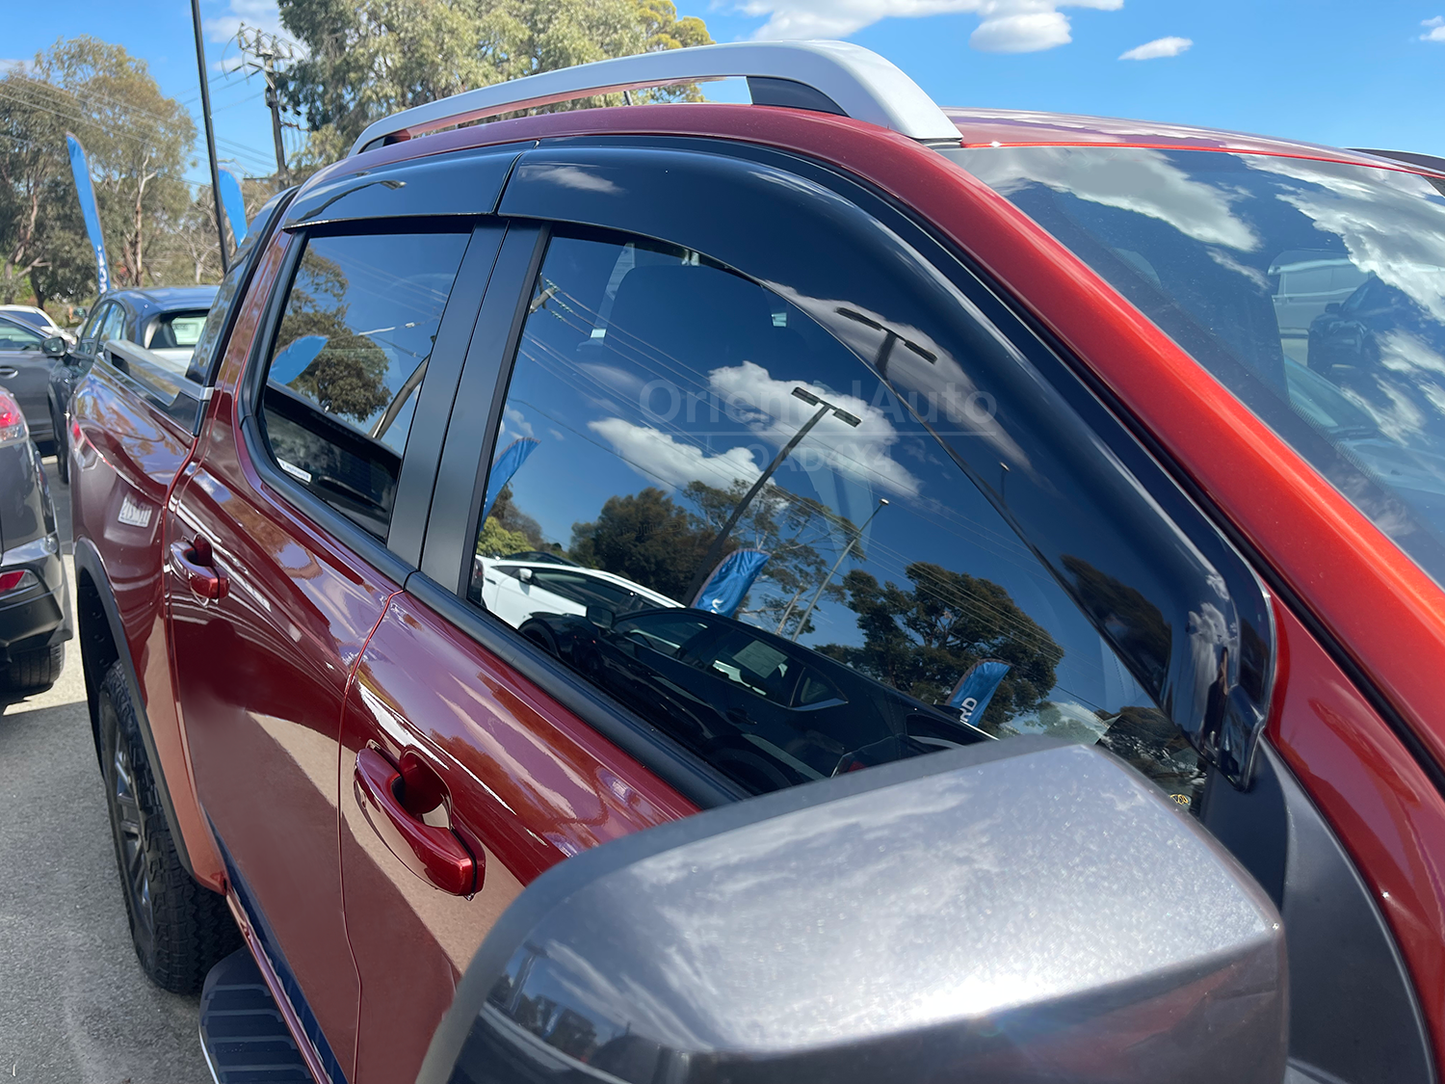 Injection Weather Shields & Stainless Steel Door Sills For Ford Ranger Dual Cab Next-Gen 2022-Onwards Window Visors Weathershields Scuff Plates